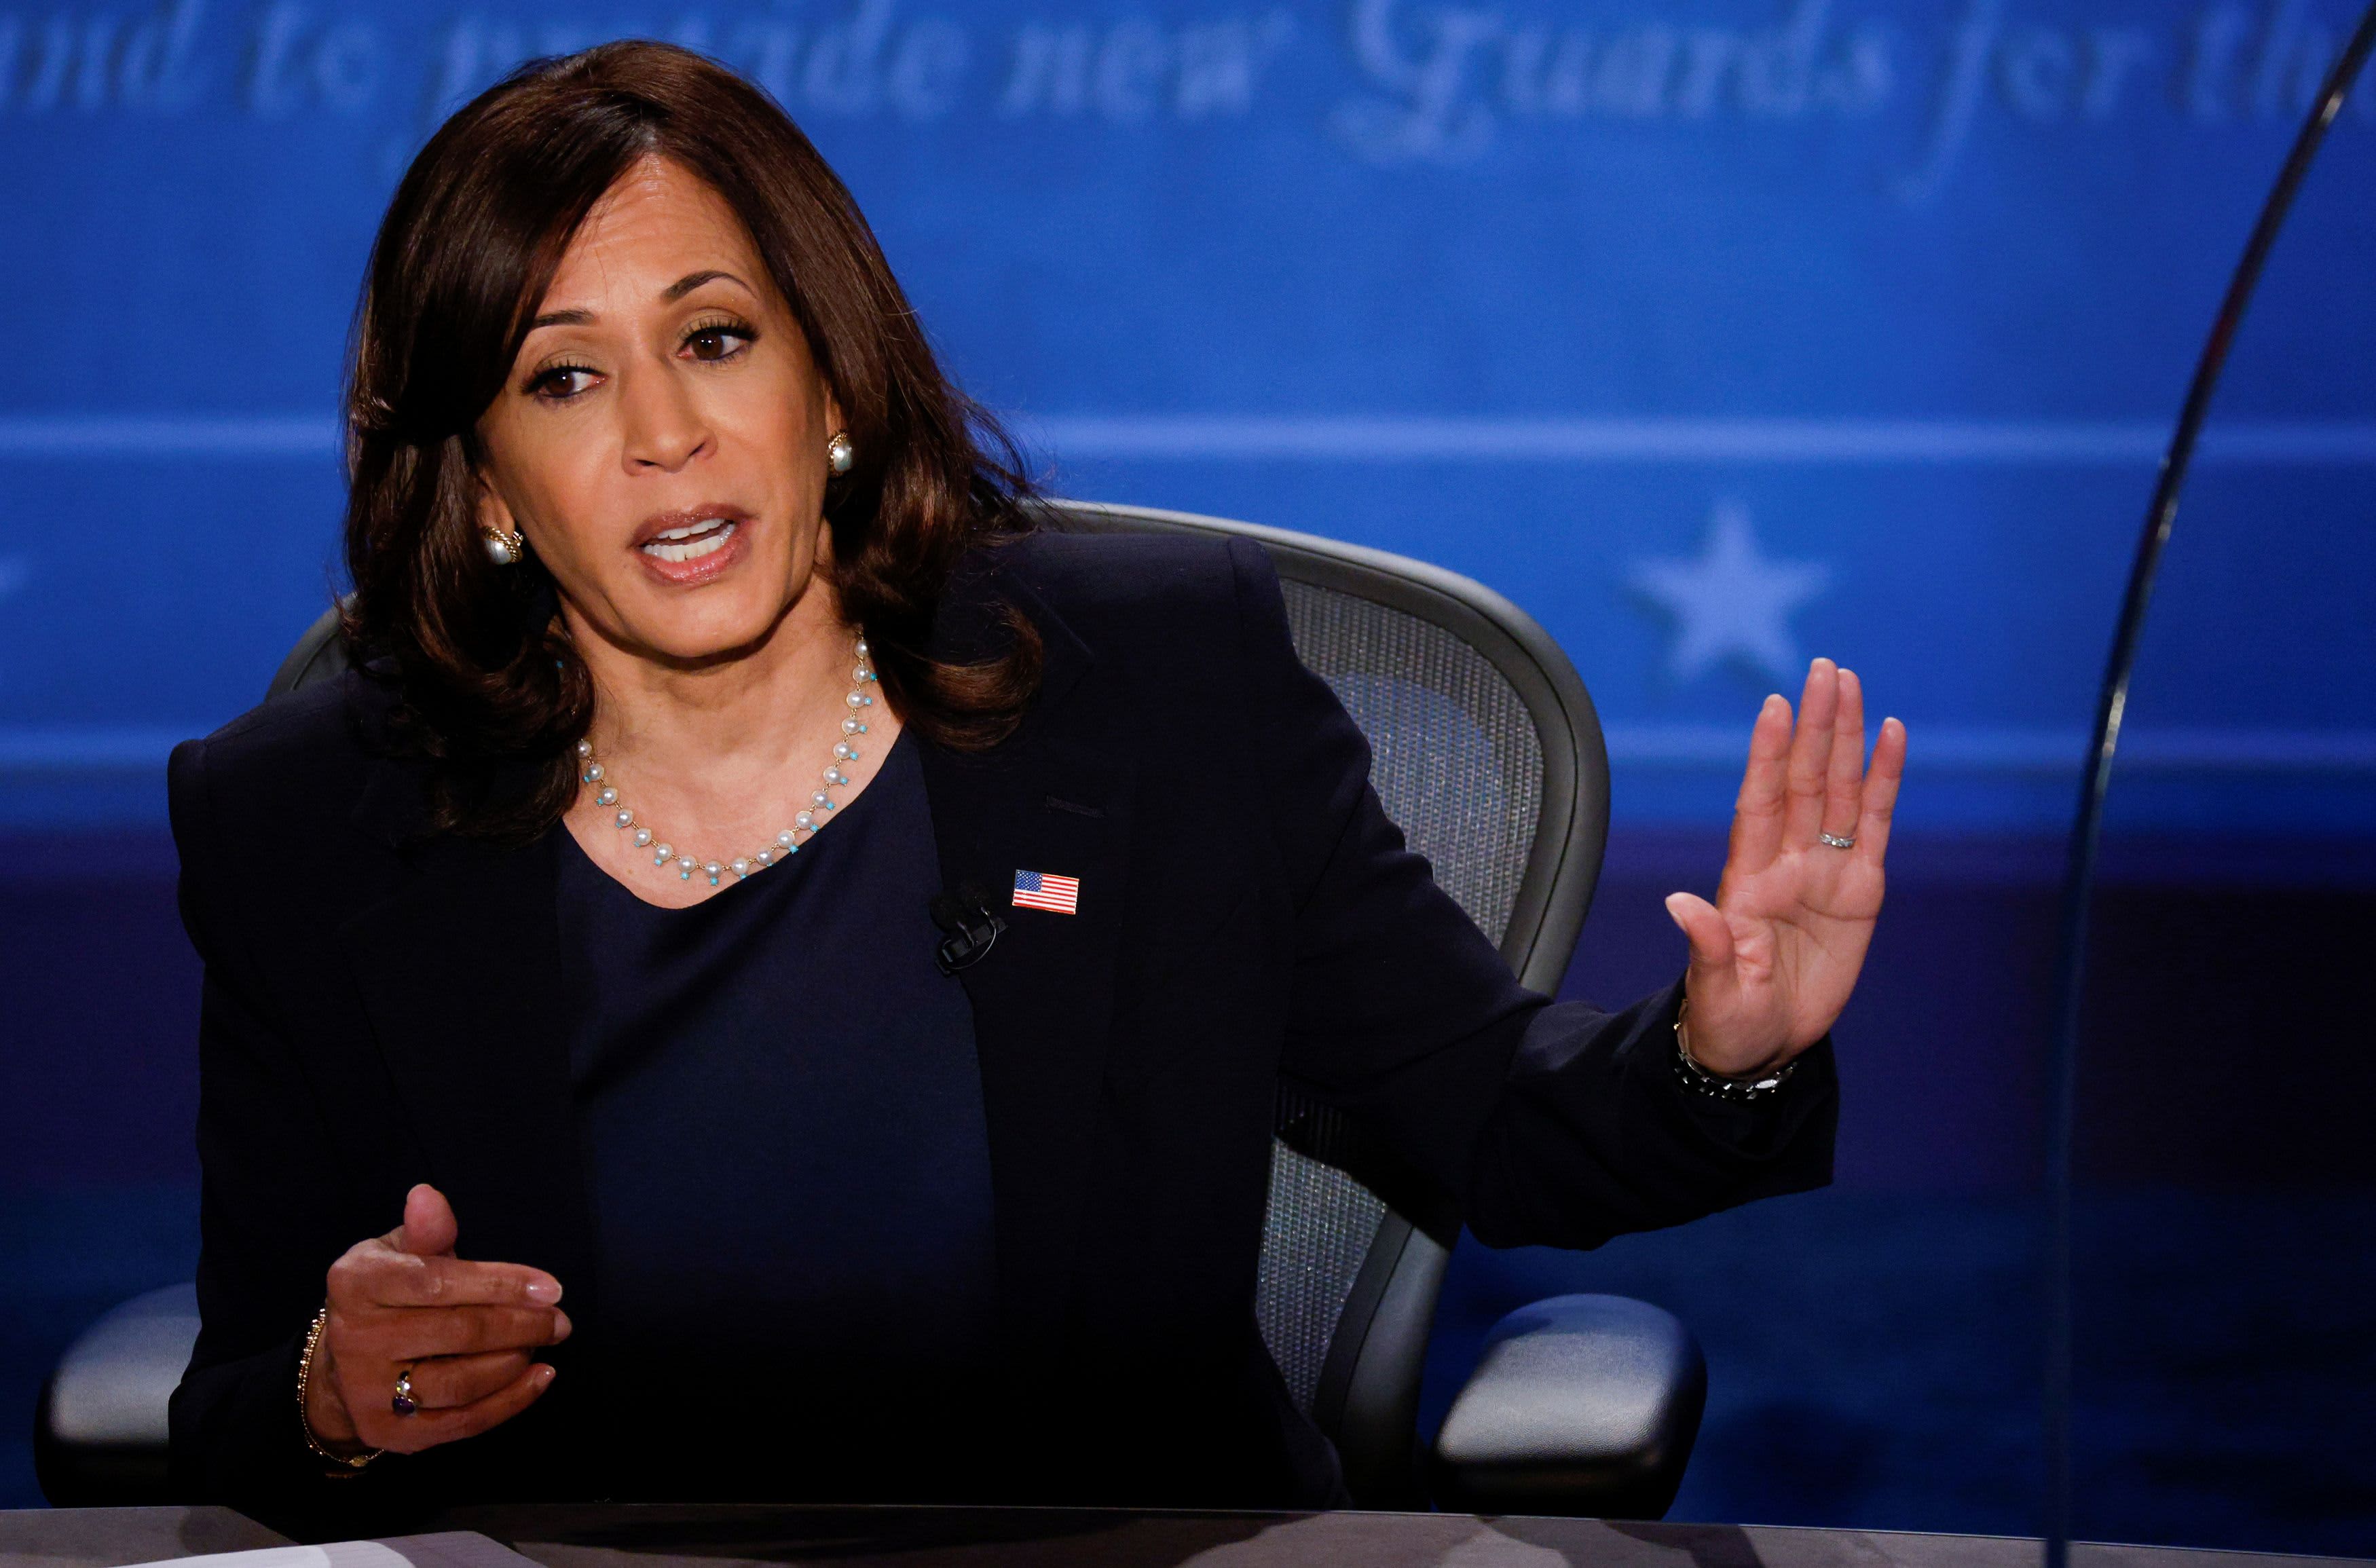 Where does Vice President-elect Kamala Harris stand on tax policy?